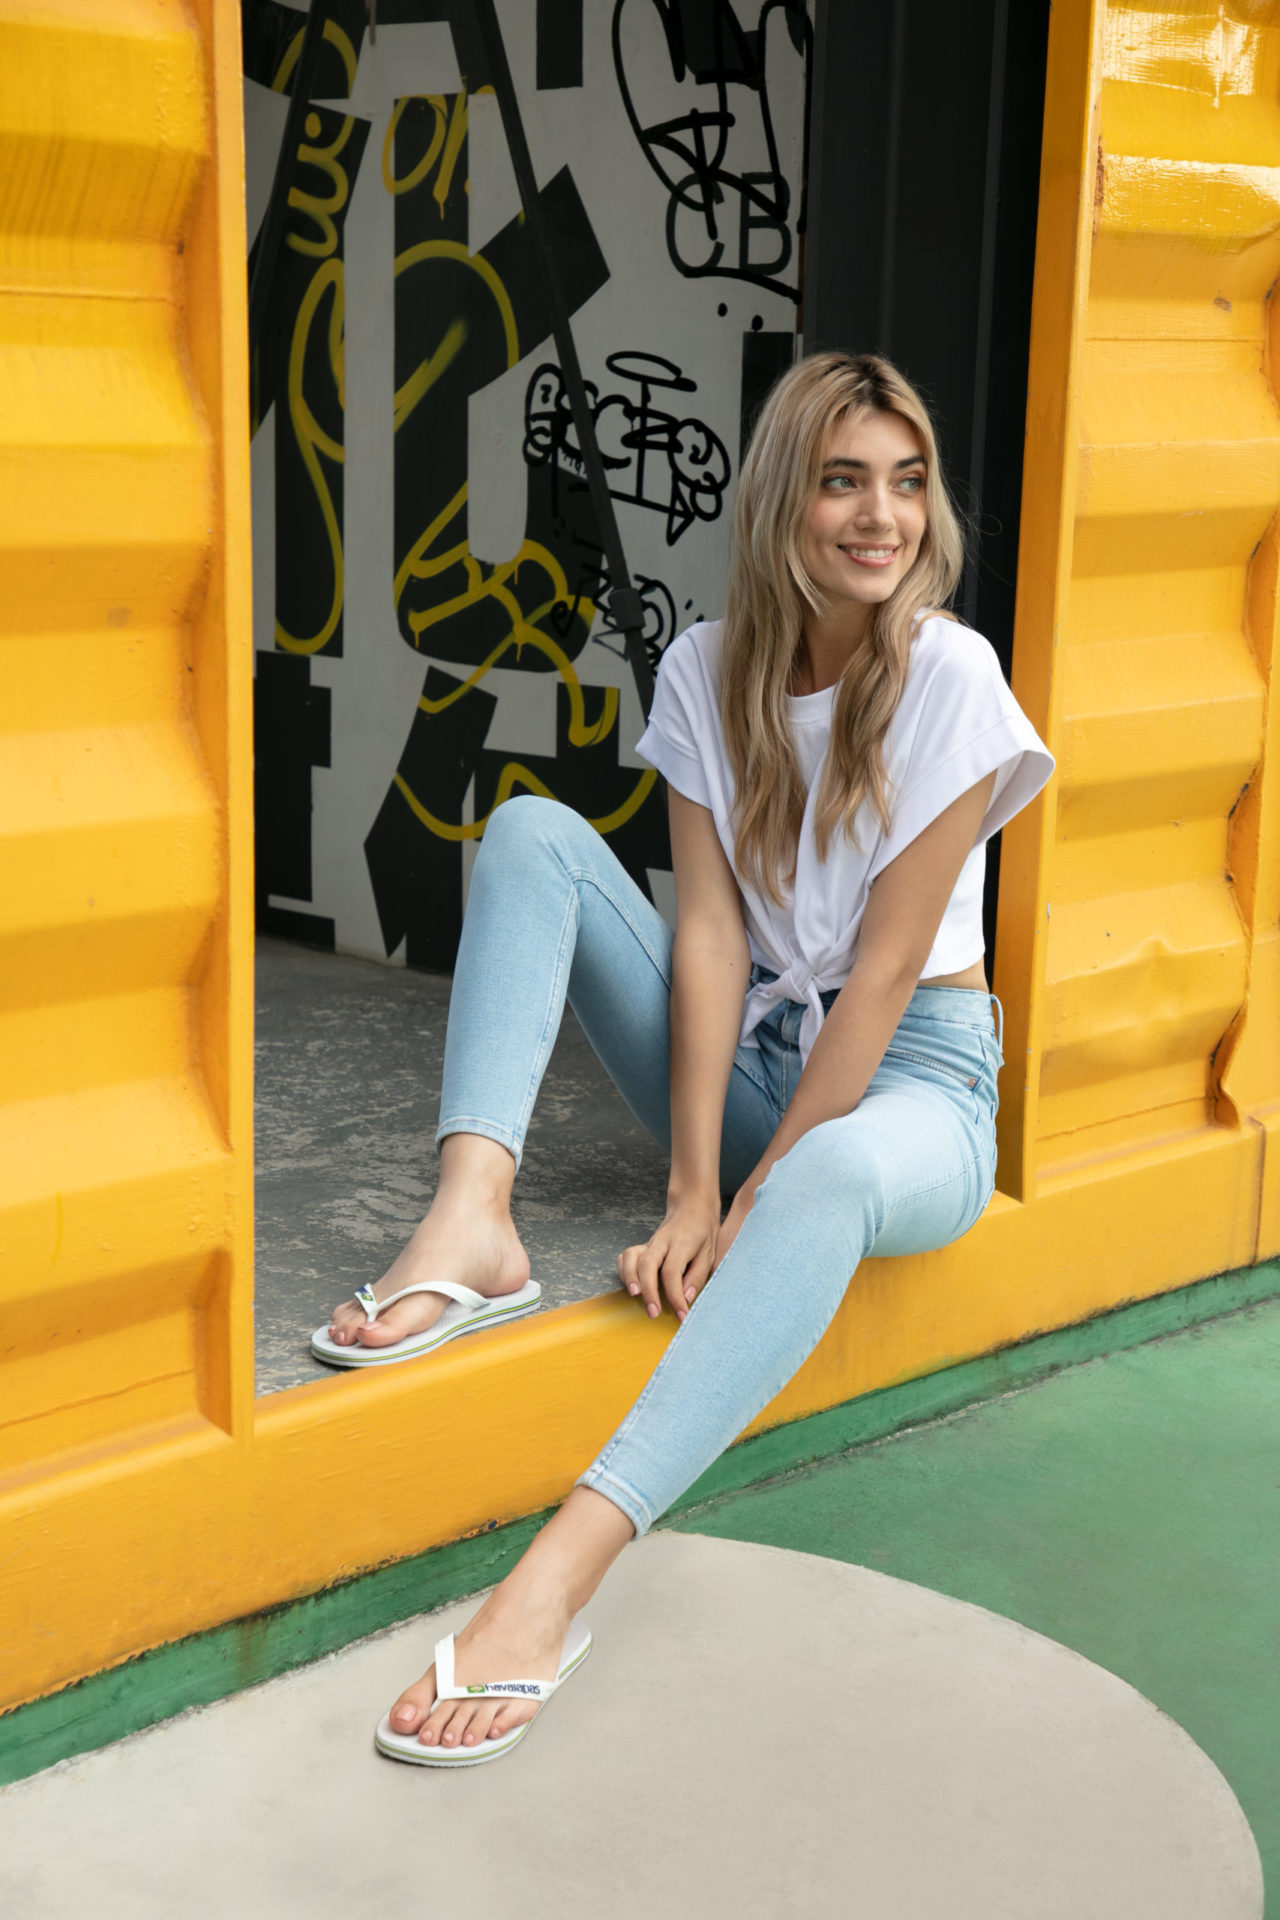 An image depicting a joyful woman wearing a white top and blue jeans, sitting on the step of a yellow shipping container with a vibrant smile. This creative promotional image was captured by I Heart Studios.